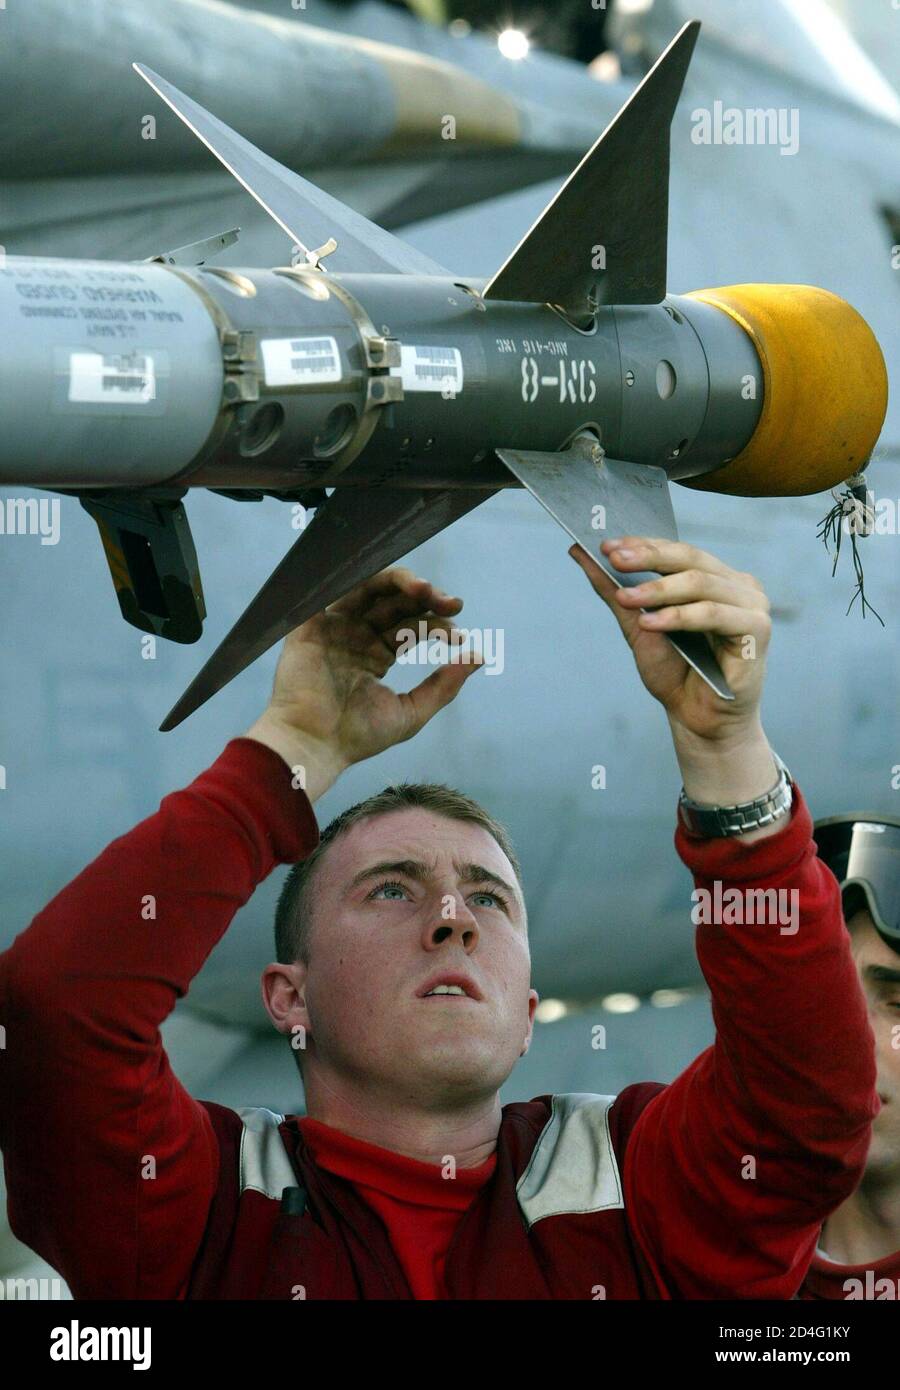 Airman Ordnance crew member Scott Inke, from Mississippi, inspects the fins on an AIM-9 Sidewinder missile on a F/14D Tomcat on board the USS Abraham Lincoln aircraft carrier in the Gulf, February 23, 2003. The USS Abraham Lincoln is part of an eight-ship battle group operating in the Gulf in support of Operation Southern Watch, as U.S. Secretary of State [Colin Powell, on a visit to Japan, dropped heavy hints about Washington's timetable for war in Iraq, saying the U.N. ought to decide what to do soon after a weapons inspectors'  report expected on March 7.] Stock Photo